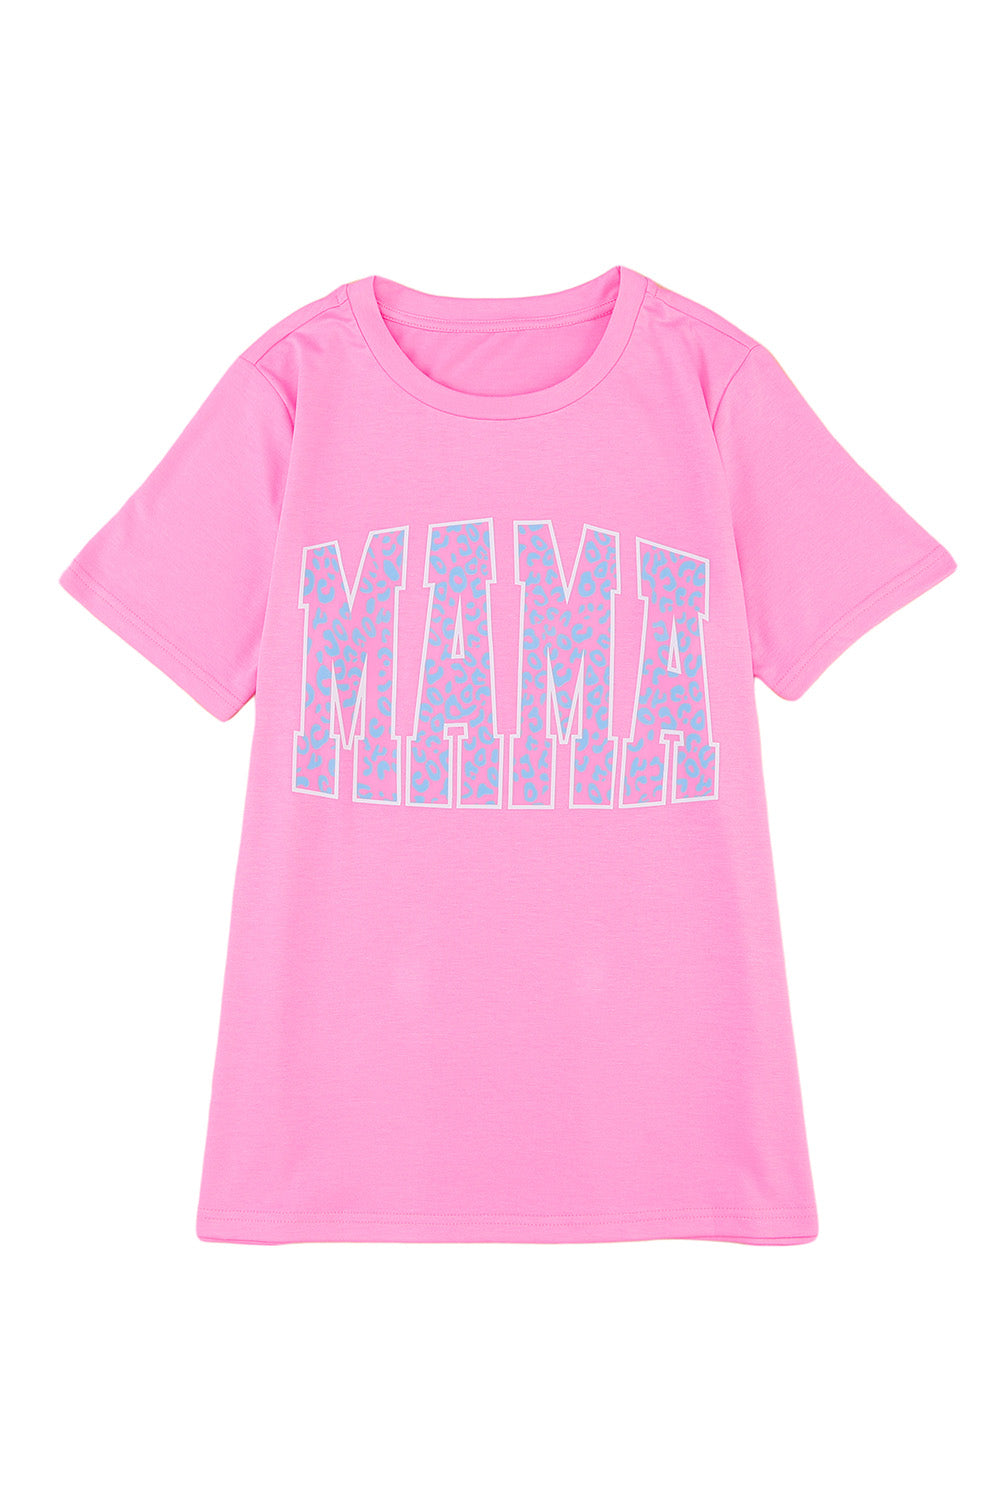 Pink MAMA Leopard Print O-neck Graphic T Shirt